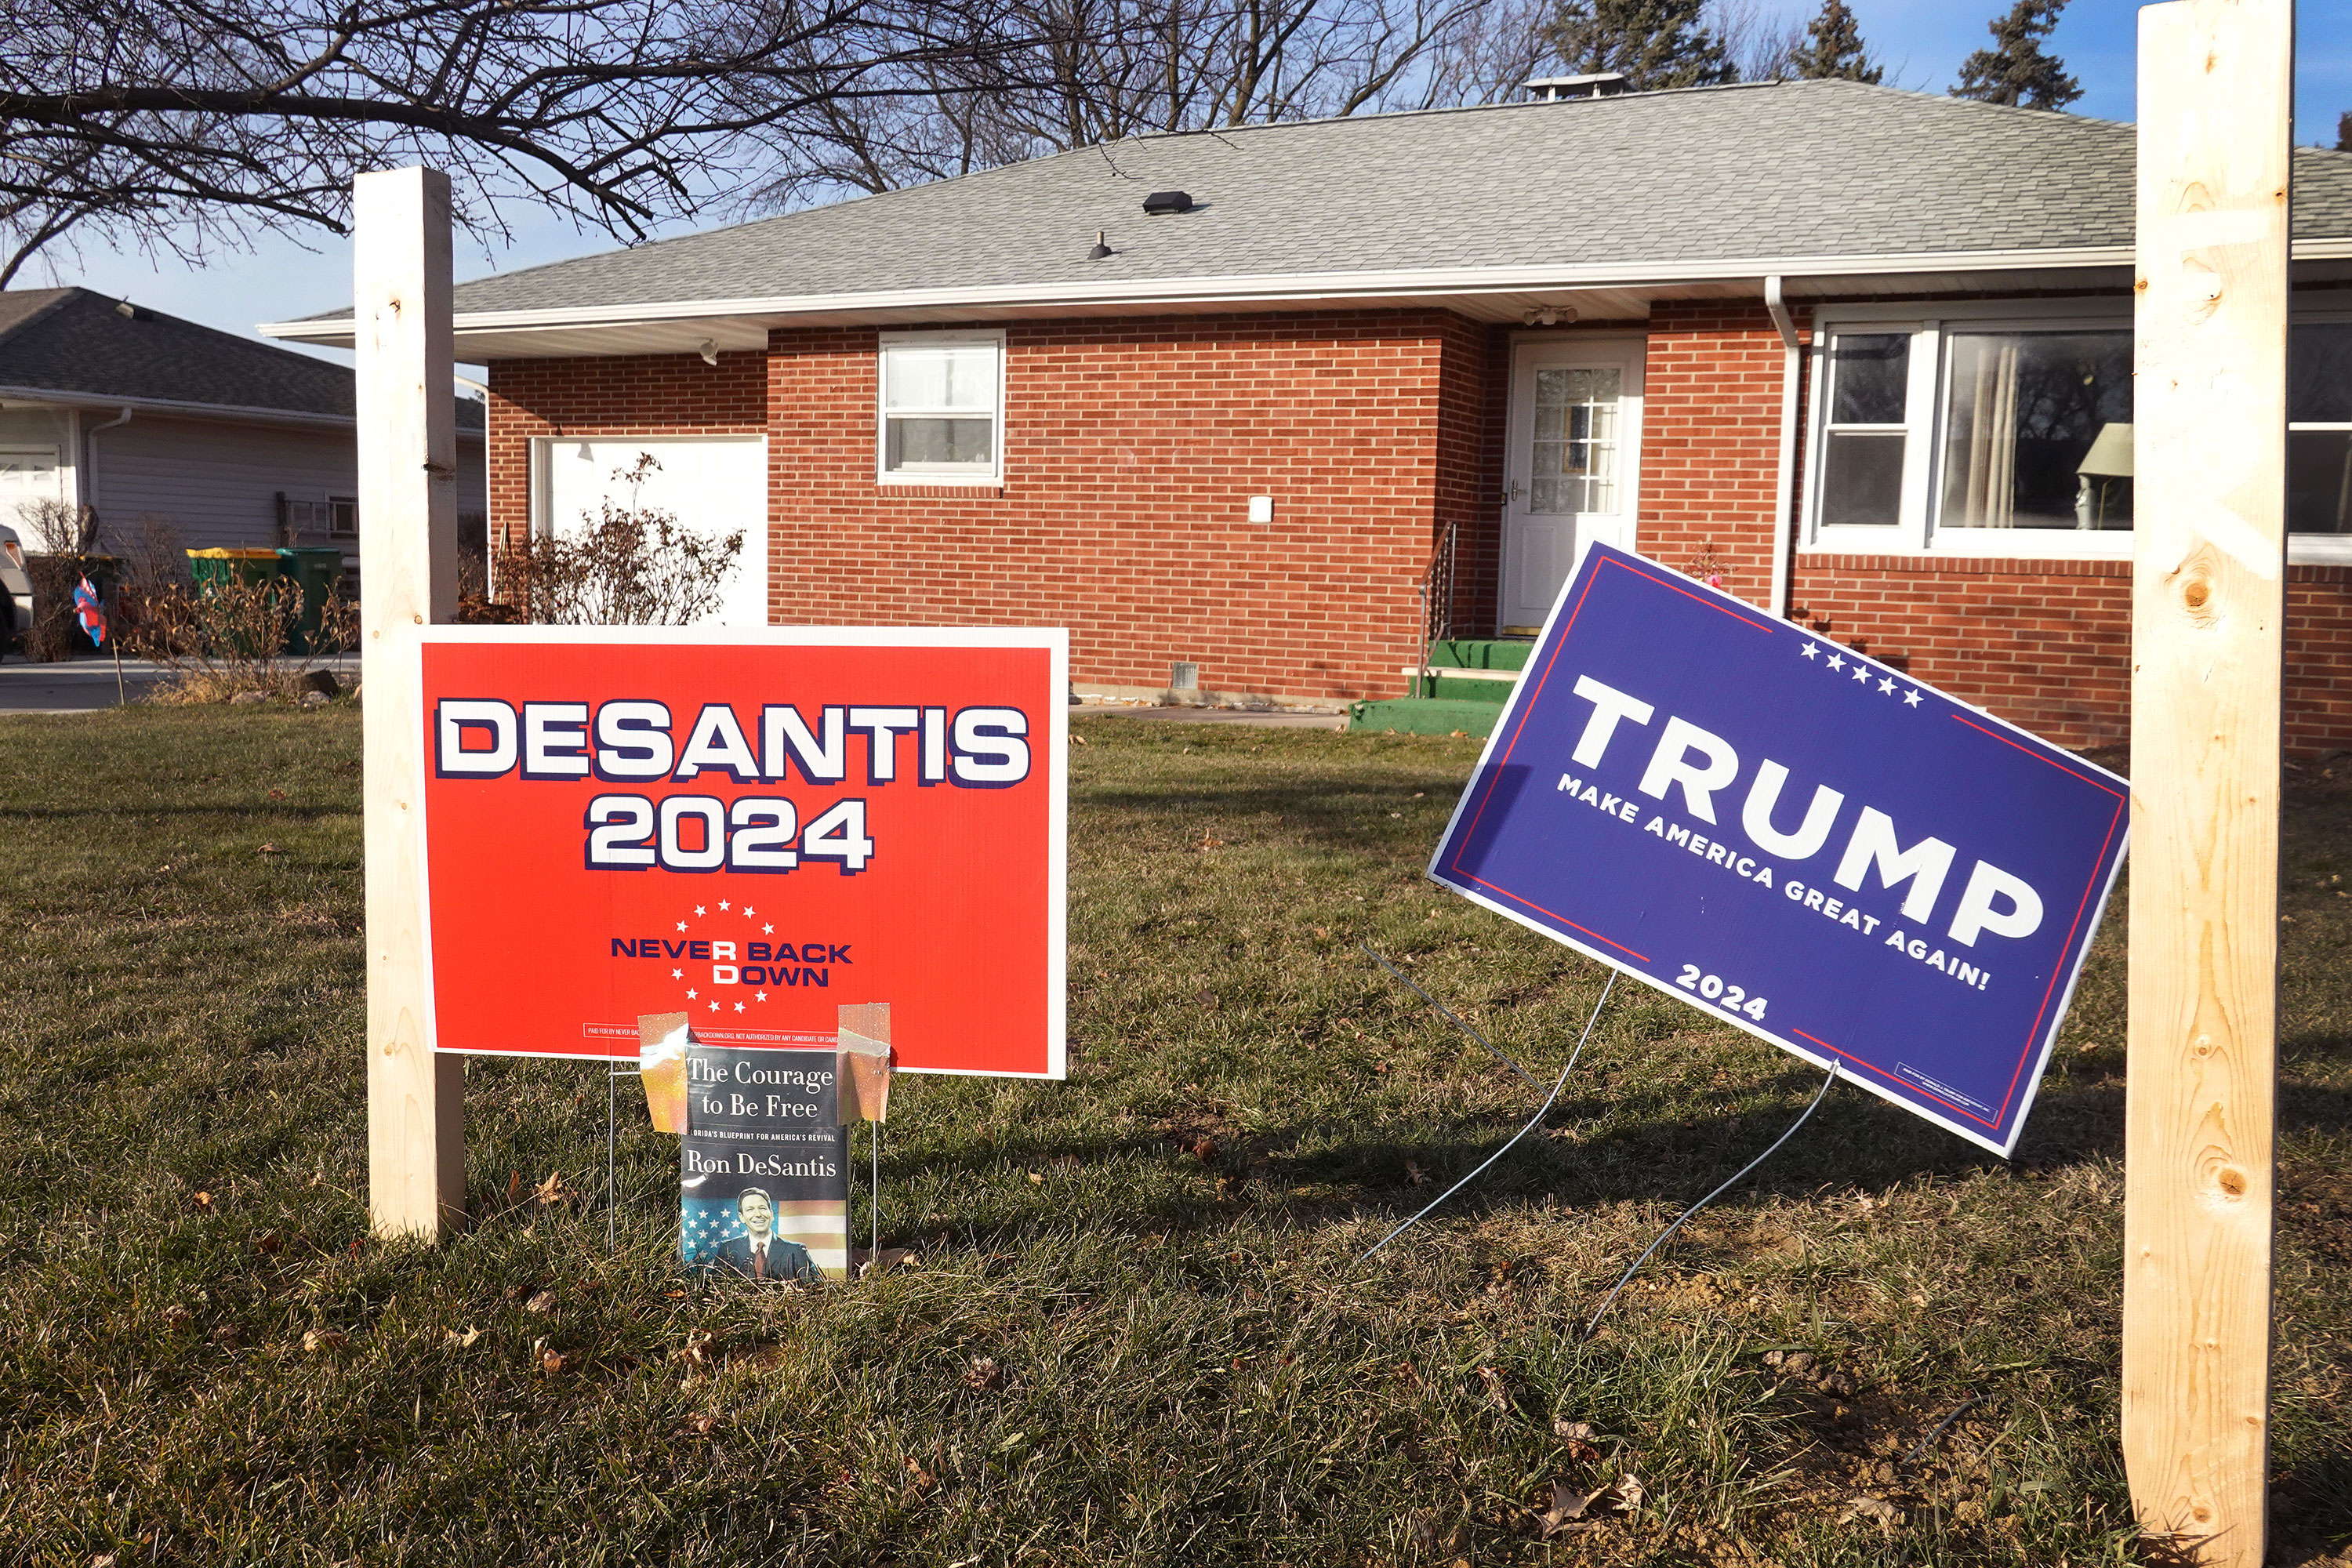 A husband and wife show their dueling support with campaign signs in front of their home in Winthrop, Iowa, on December 20.